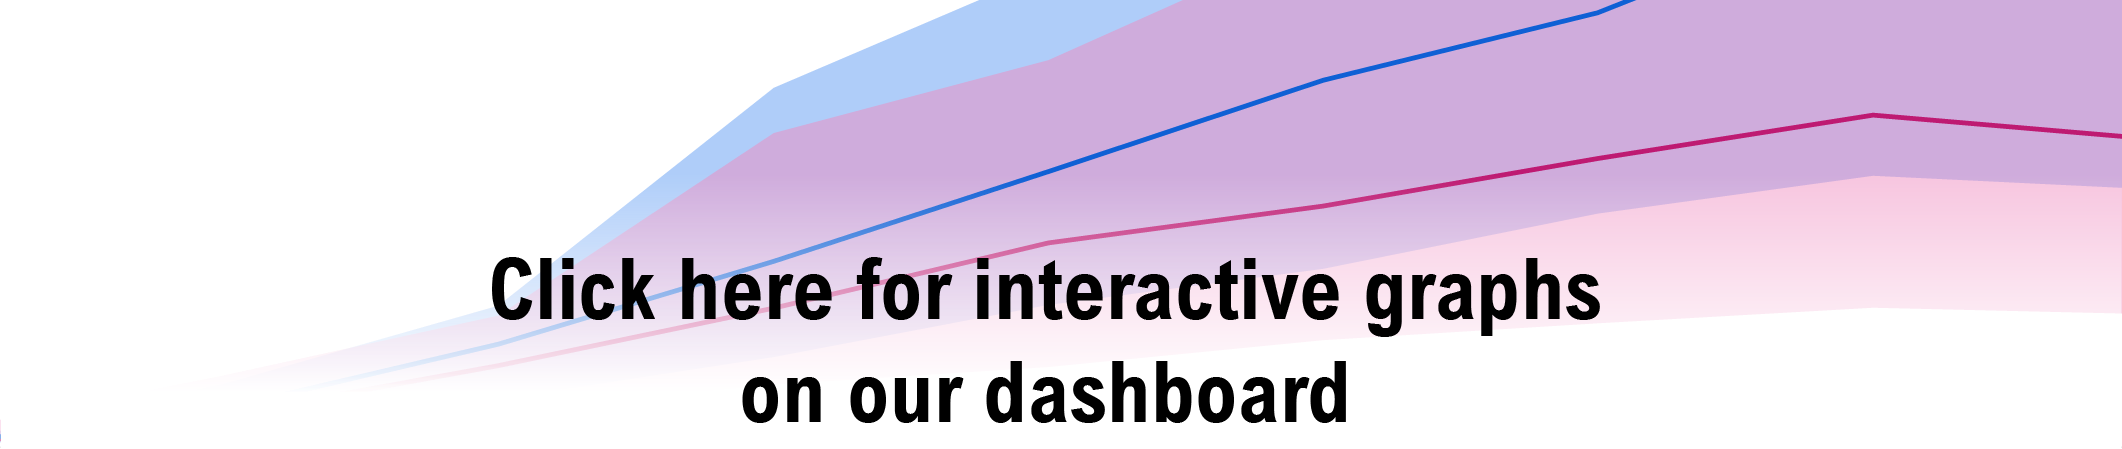 Click here for interactive graphs on our dashboard